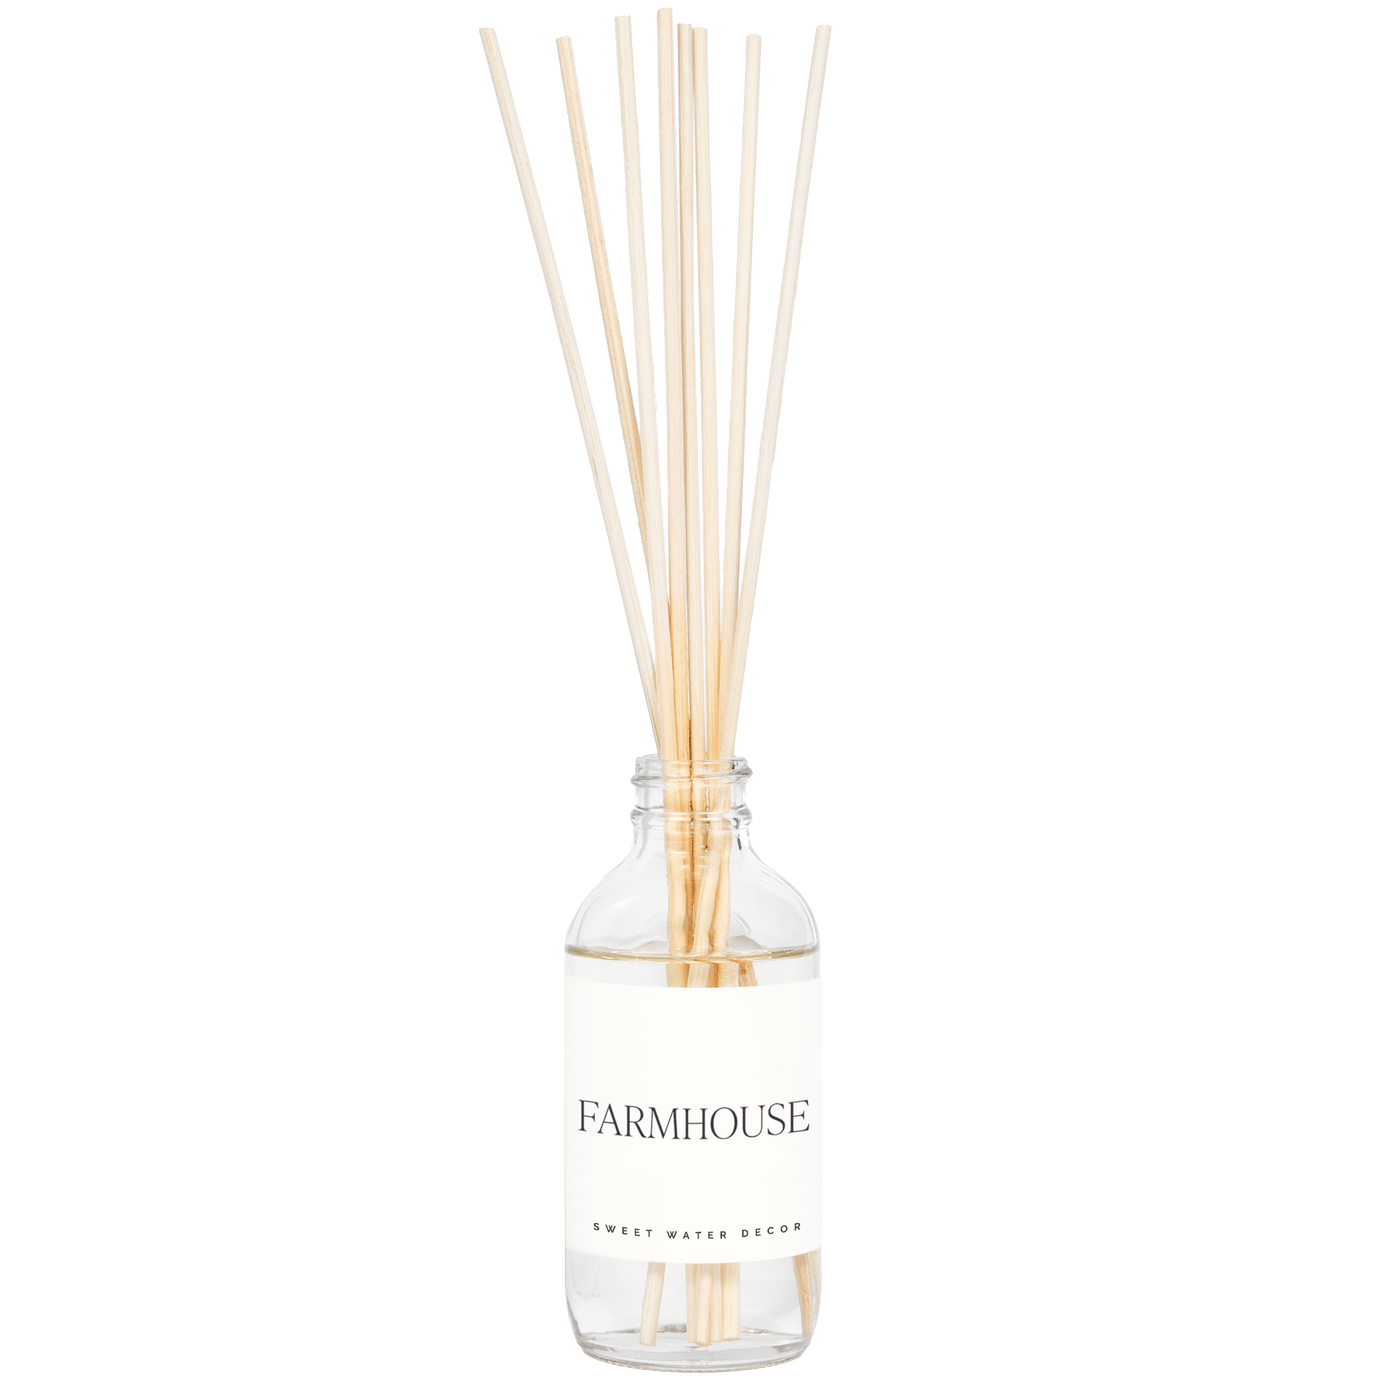 Farmhouse Clear Reed Diffuser - Sweet Water Decor - Reed Diffusers